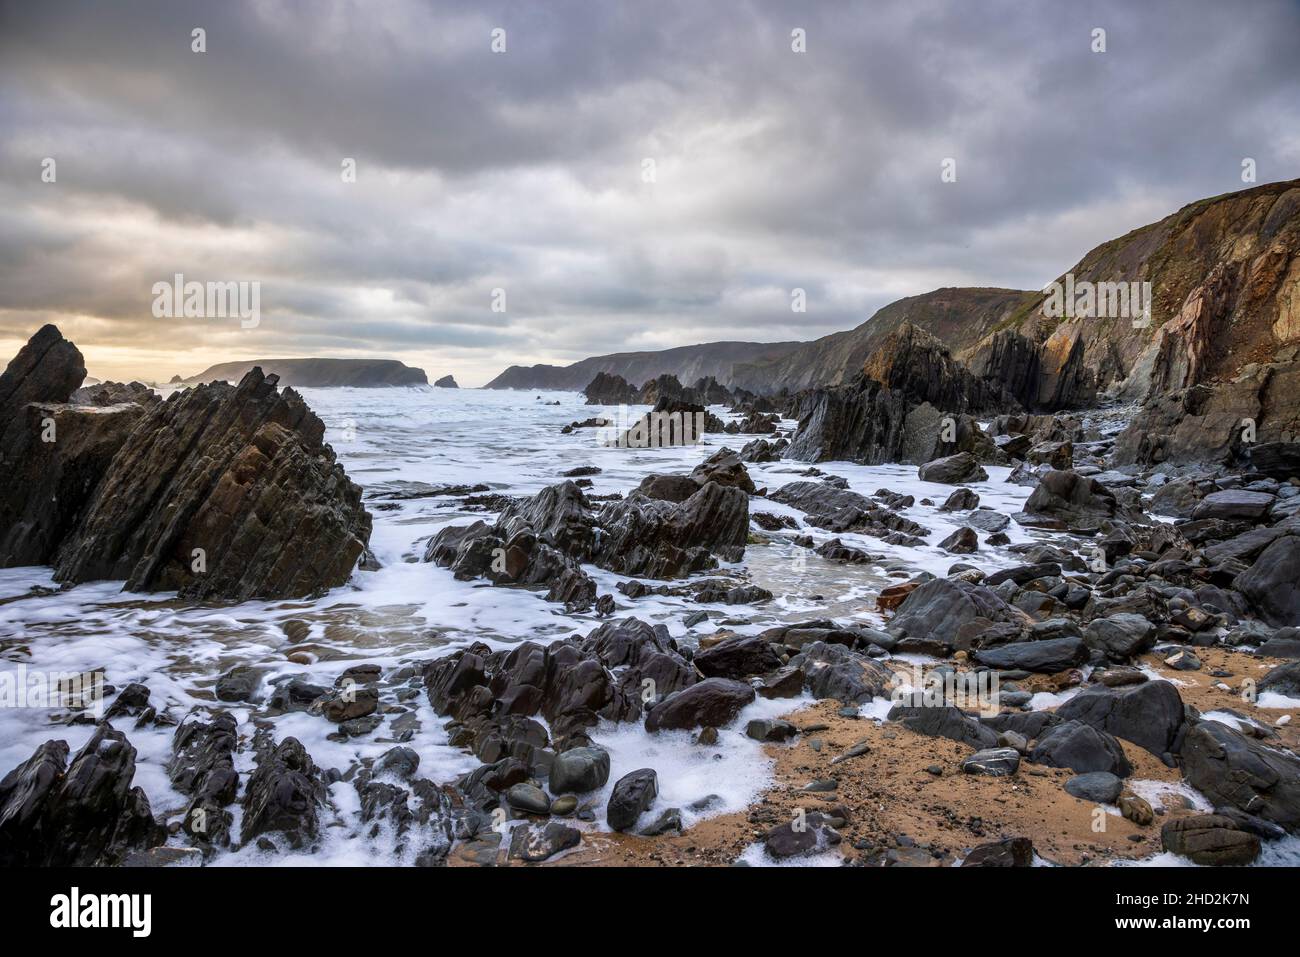 Beach and rocks at Marloes Sands just after high-tide in the winter, Pembrokeshire, South Wales Stock Photo